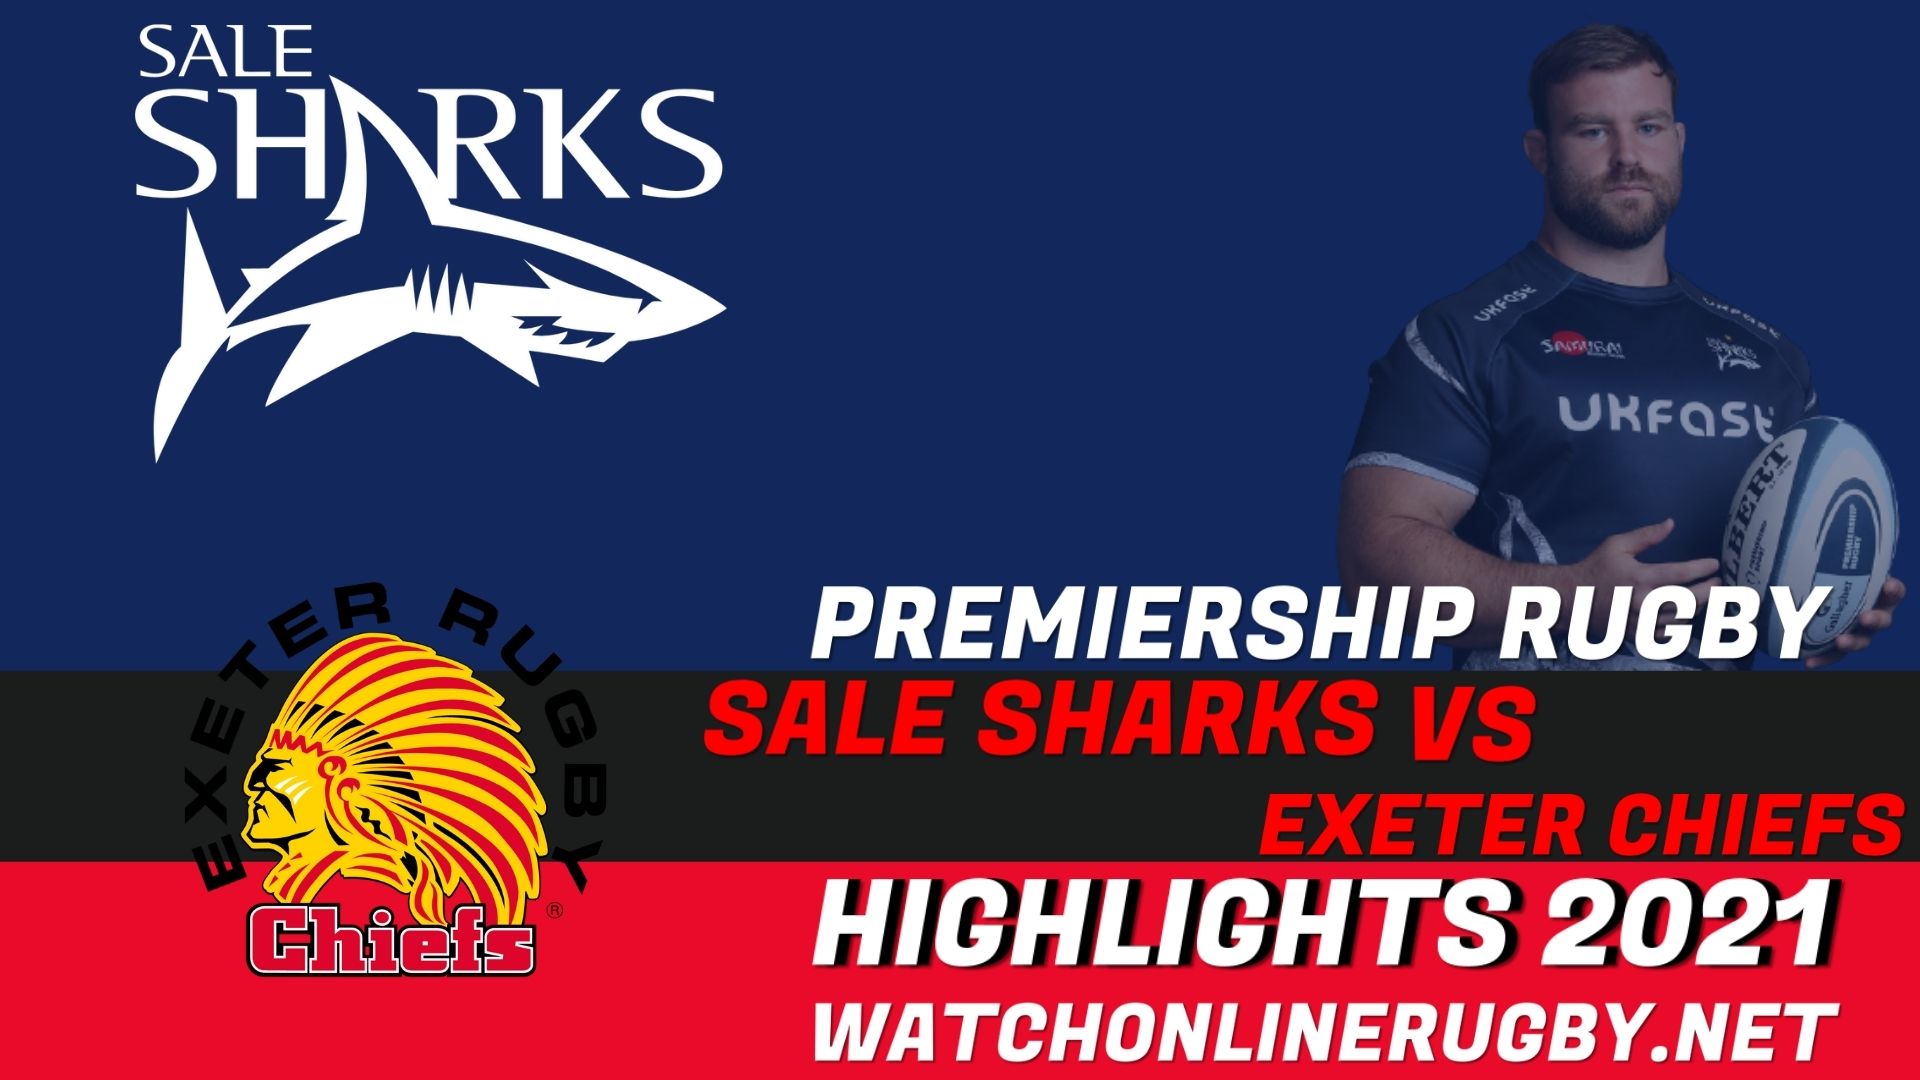 Sale Sharks Vs Exeter Chiefs Premiership Rugby 2021 RD 3